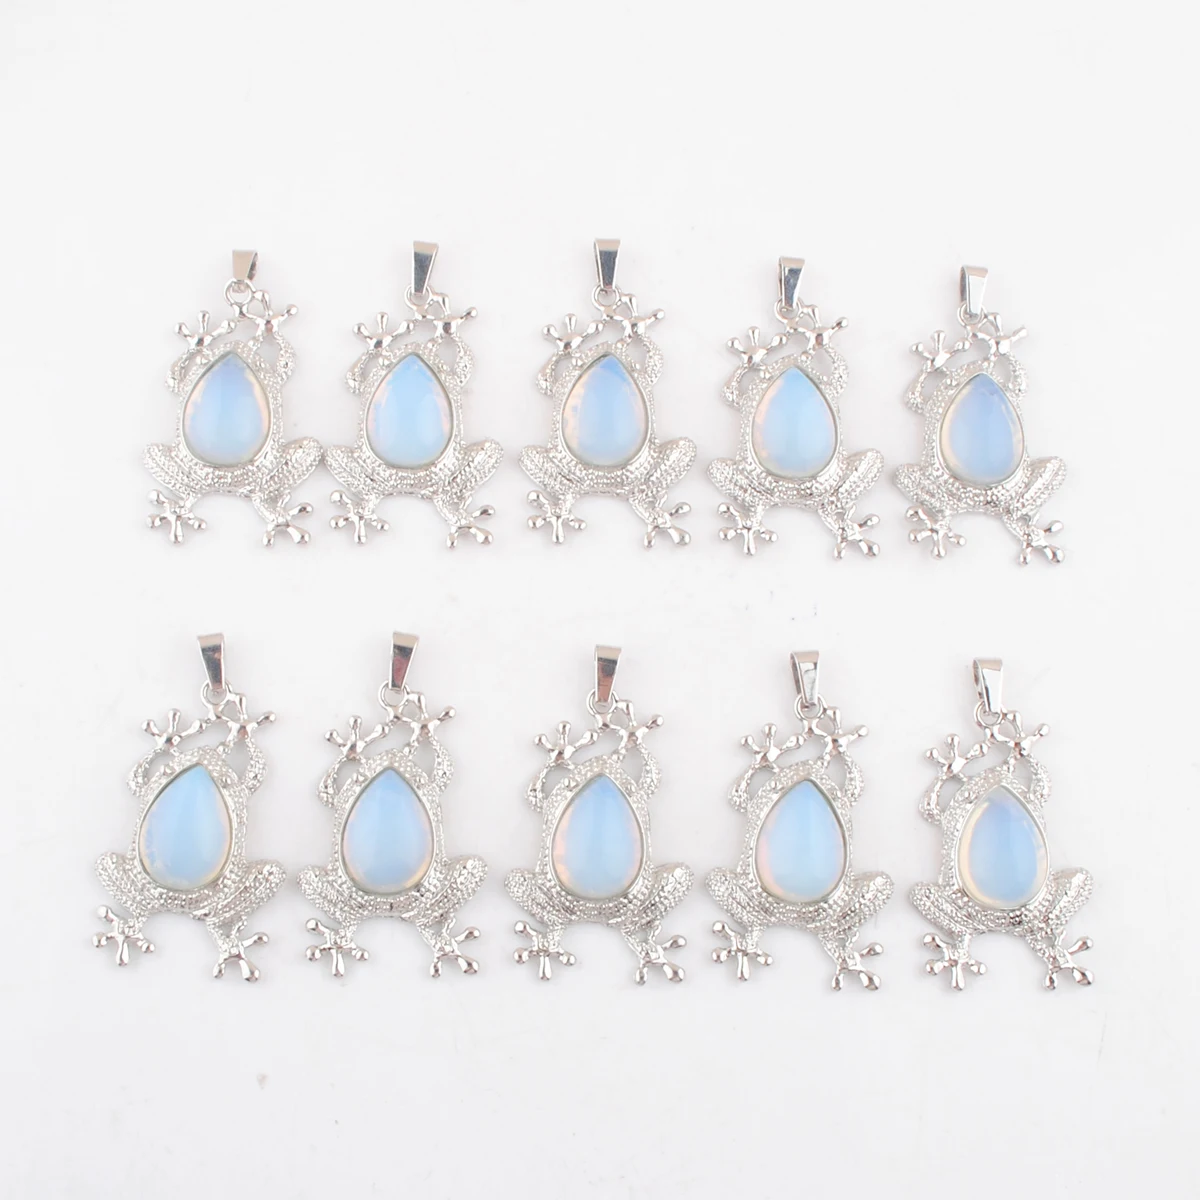 

Natural Opal Stone Pendant Frog Shape Charms For Ornaments Jewelry Making DIY Finding Craft Wholesale 10Pcs TN4627